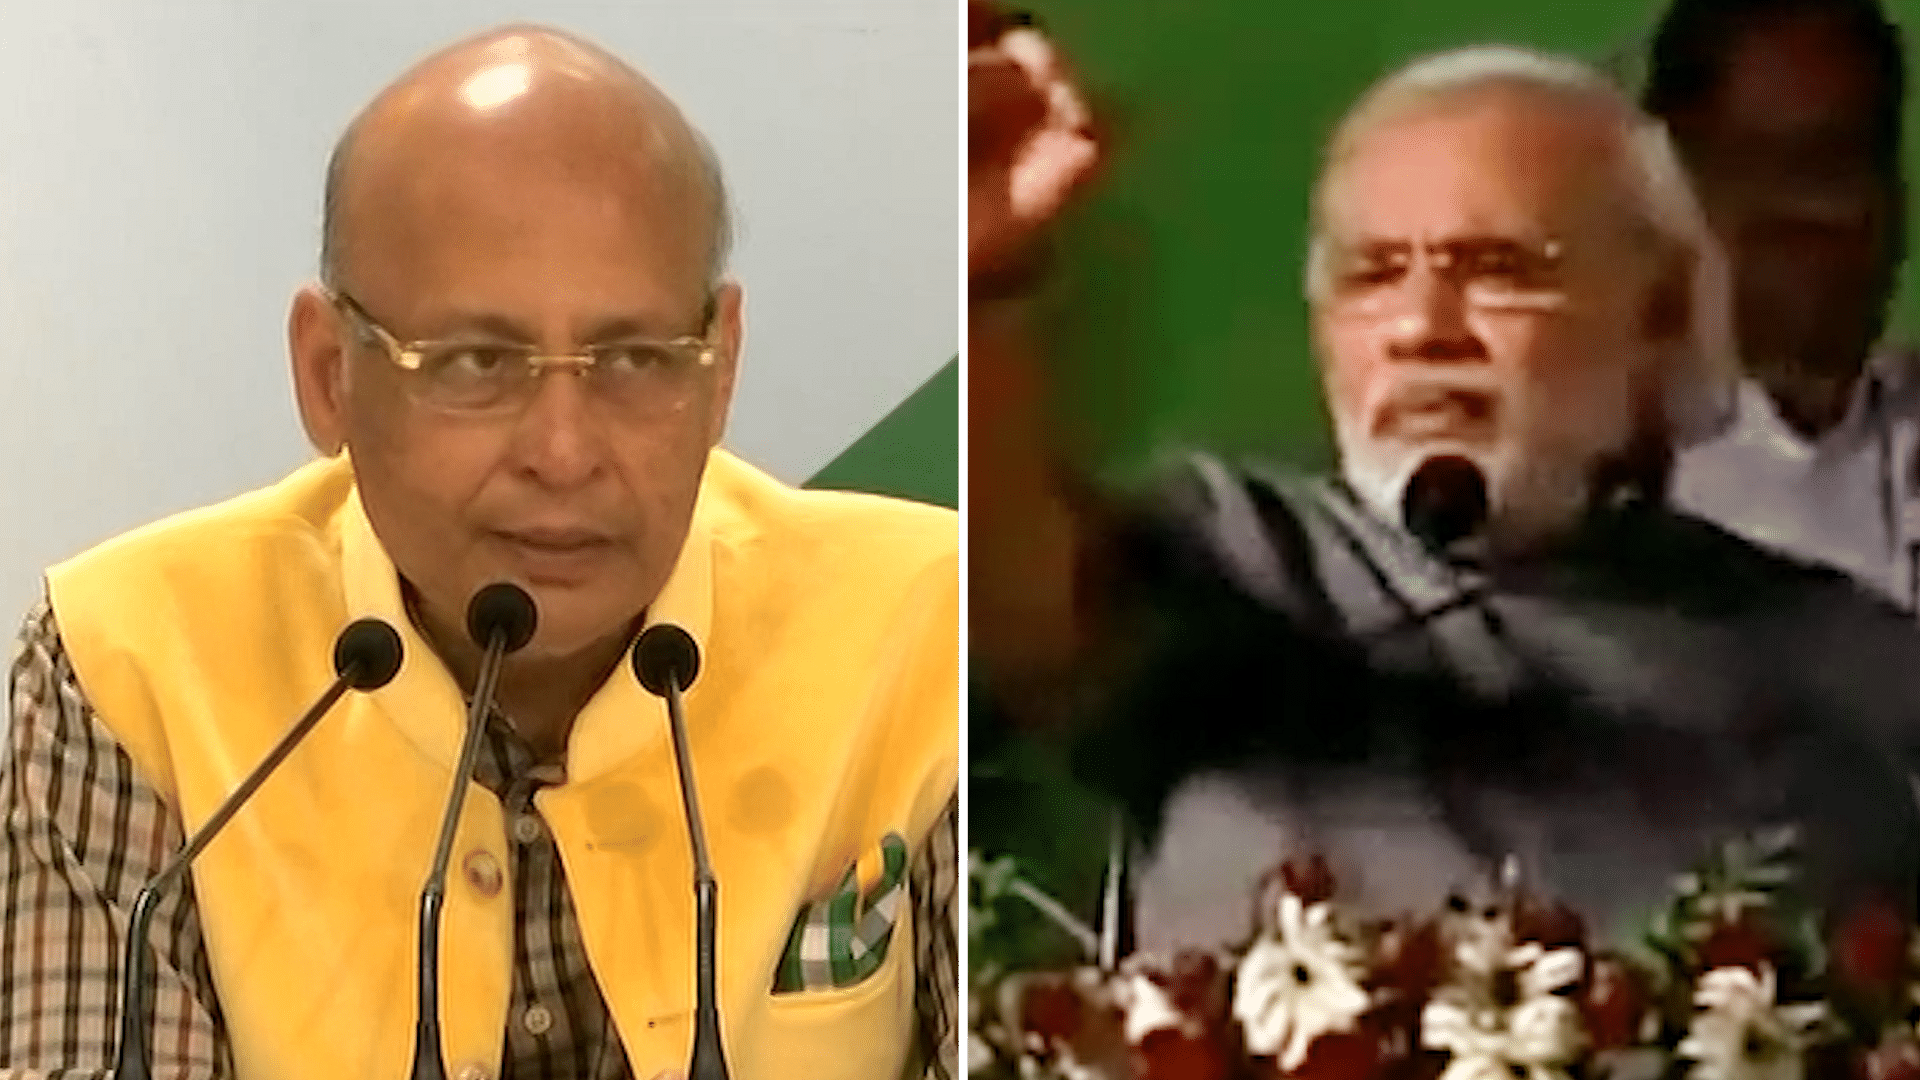 Congress leader Abhishek Manu Singhvi turned the tables on PM Modi, who had posed the exact same set of questions on India’s security in 2012.&nbsp;